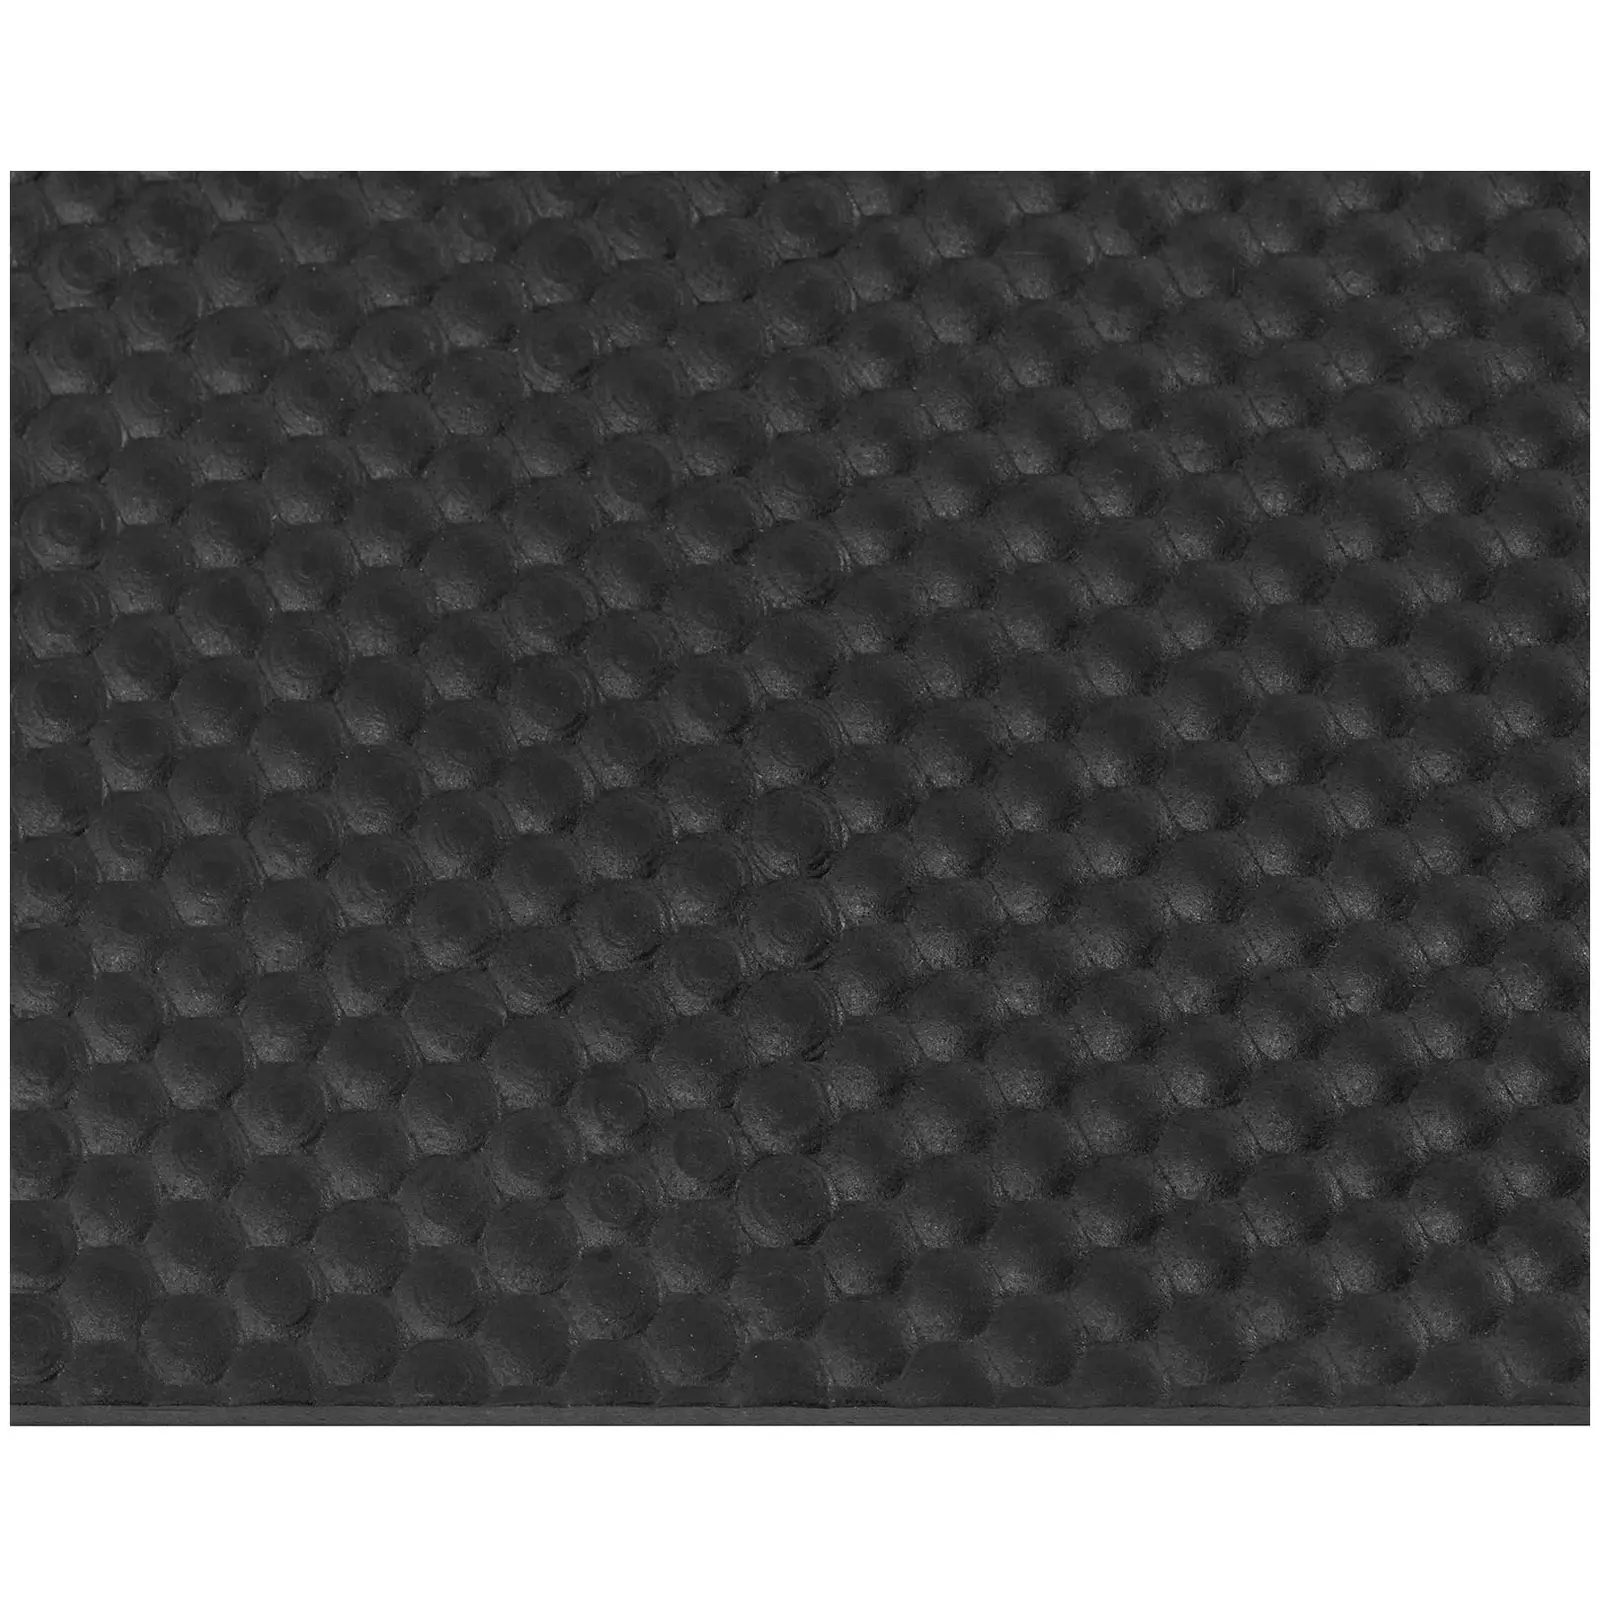 Stable Mats - set of 30 - with drainage studs - 1830 x 1220 mm - 66.9 m²